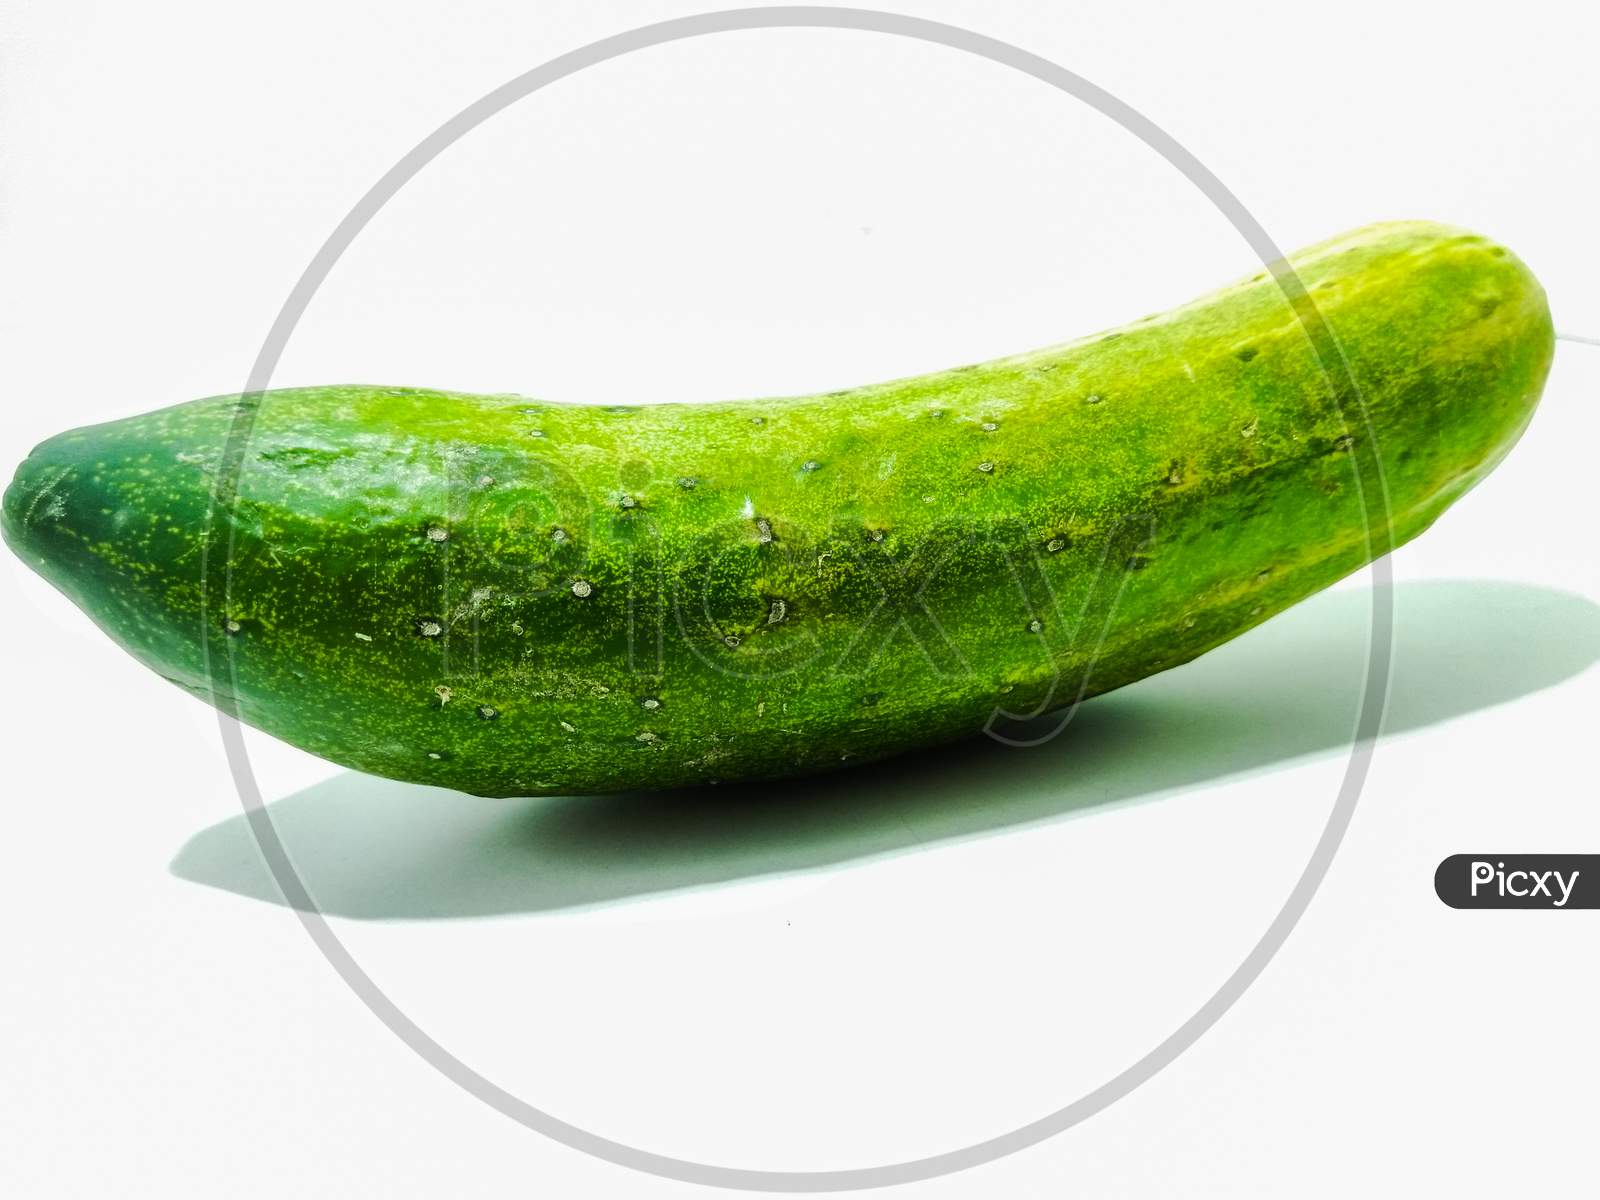 A picture of cucumber